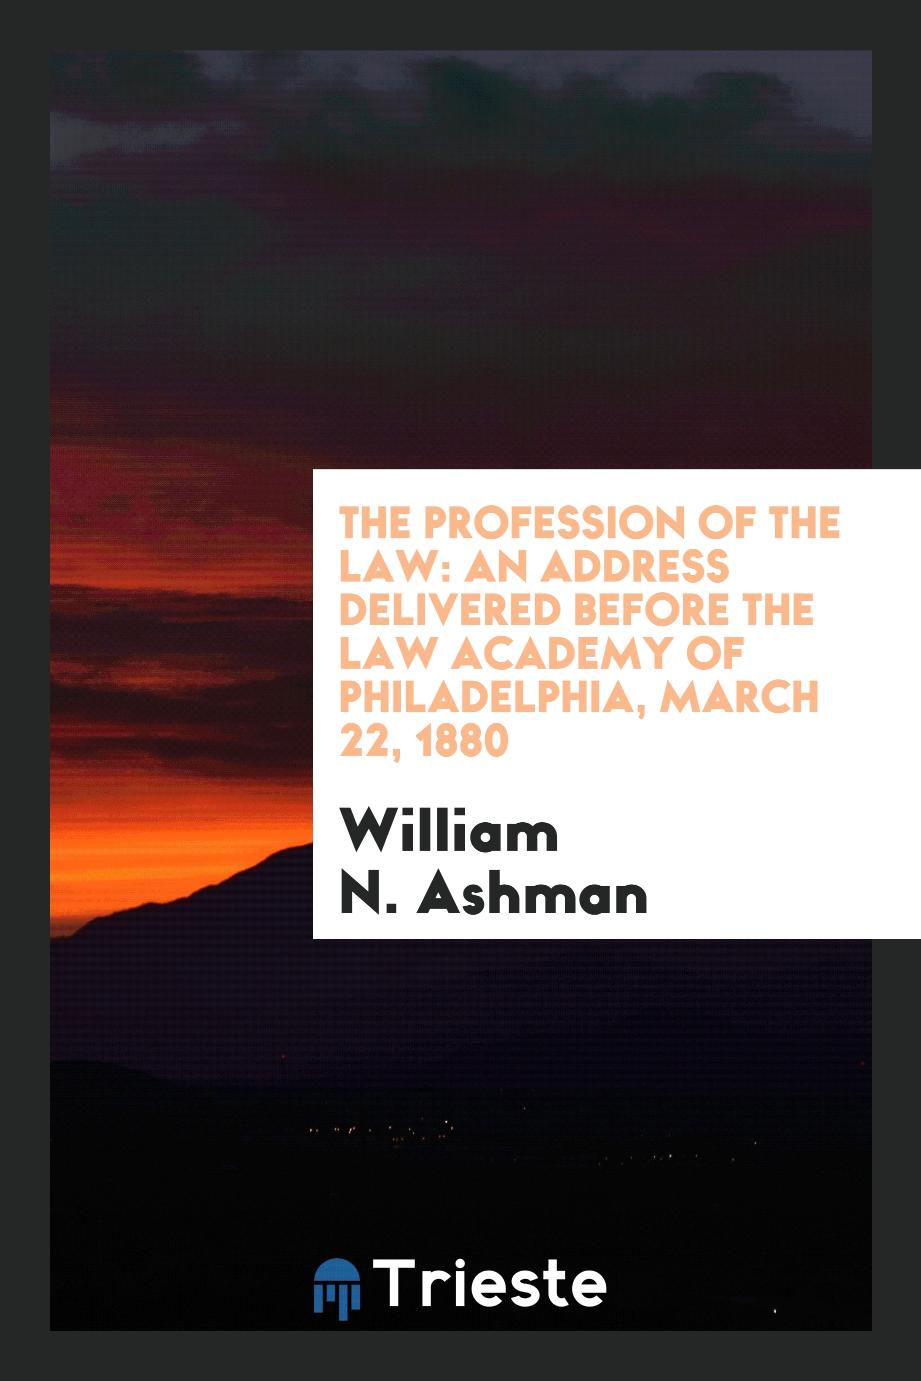 The Profession of the Law: An Address Delivered Before the Law Academy of Philadelphia, March 22, 1880